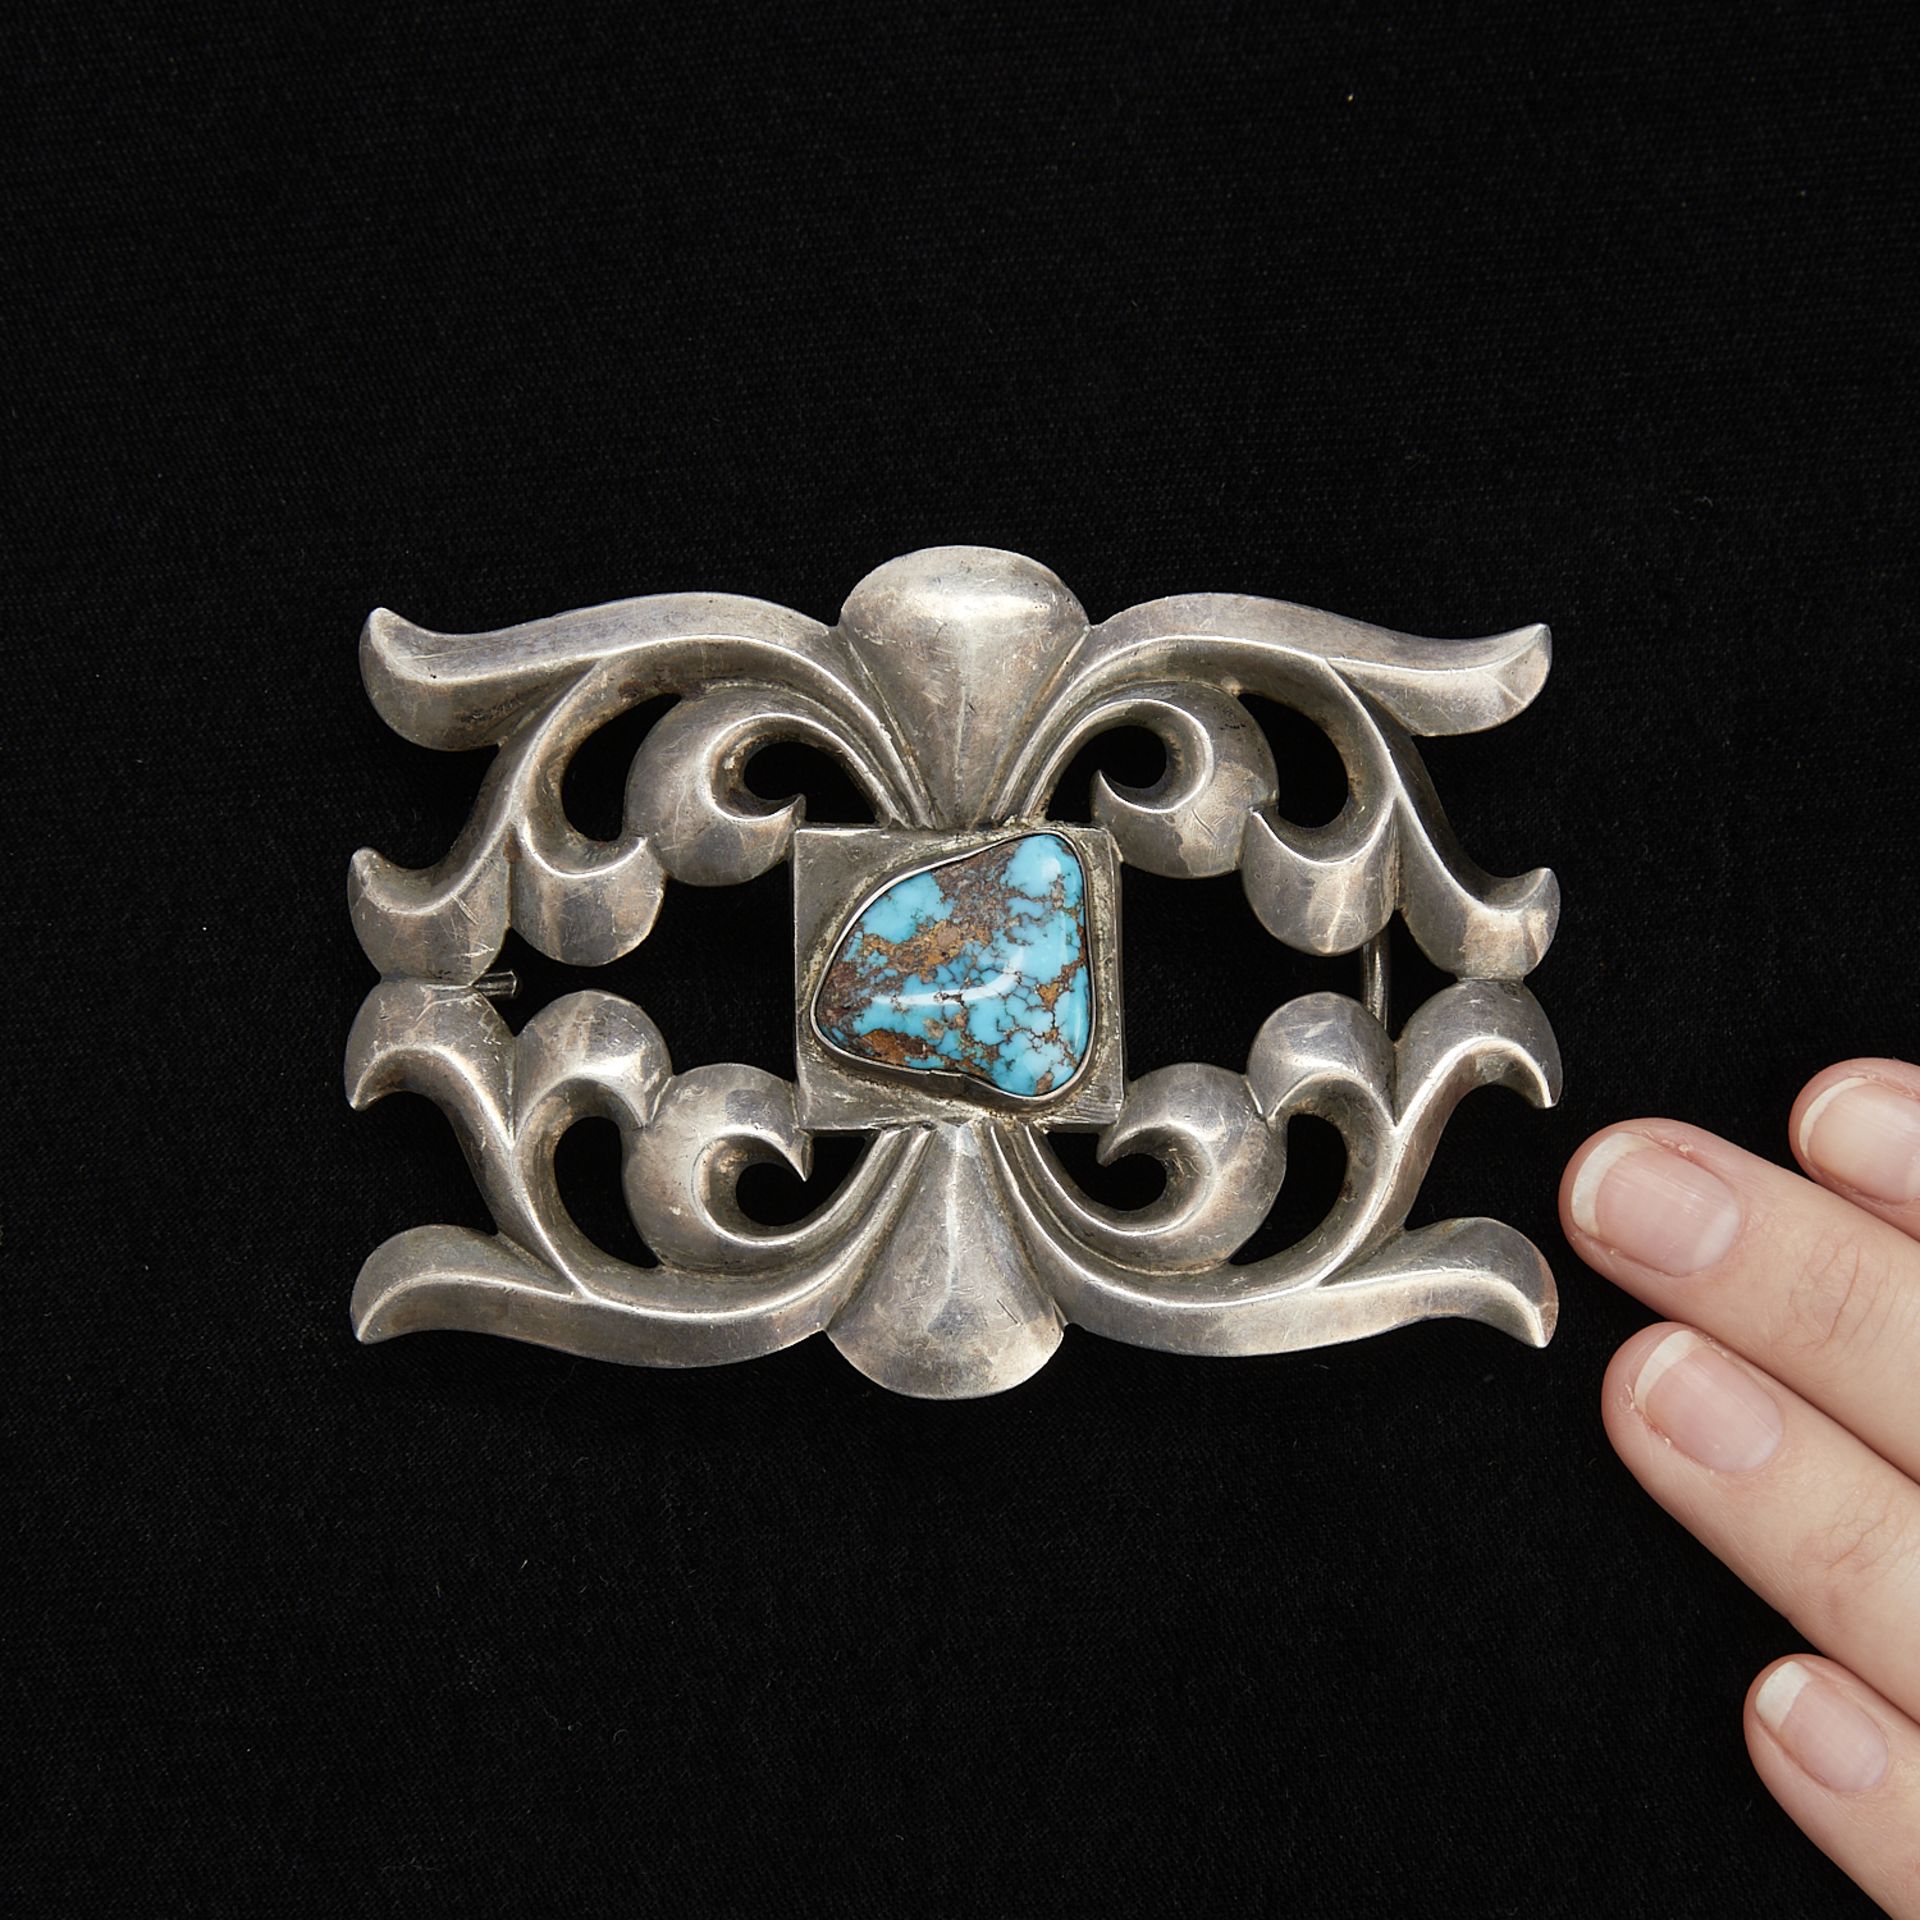 Large Sandcast Buckle w/ Turquoise - Image 2 of 7